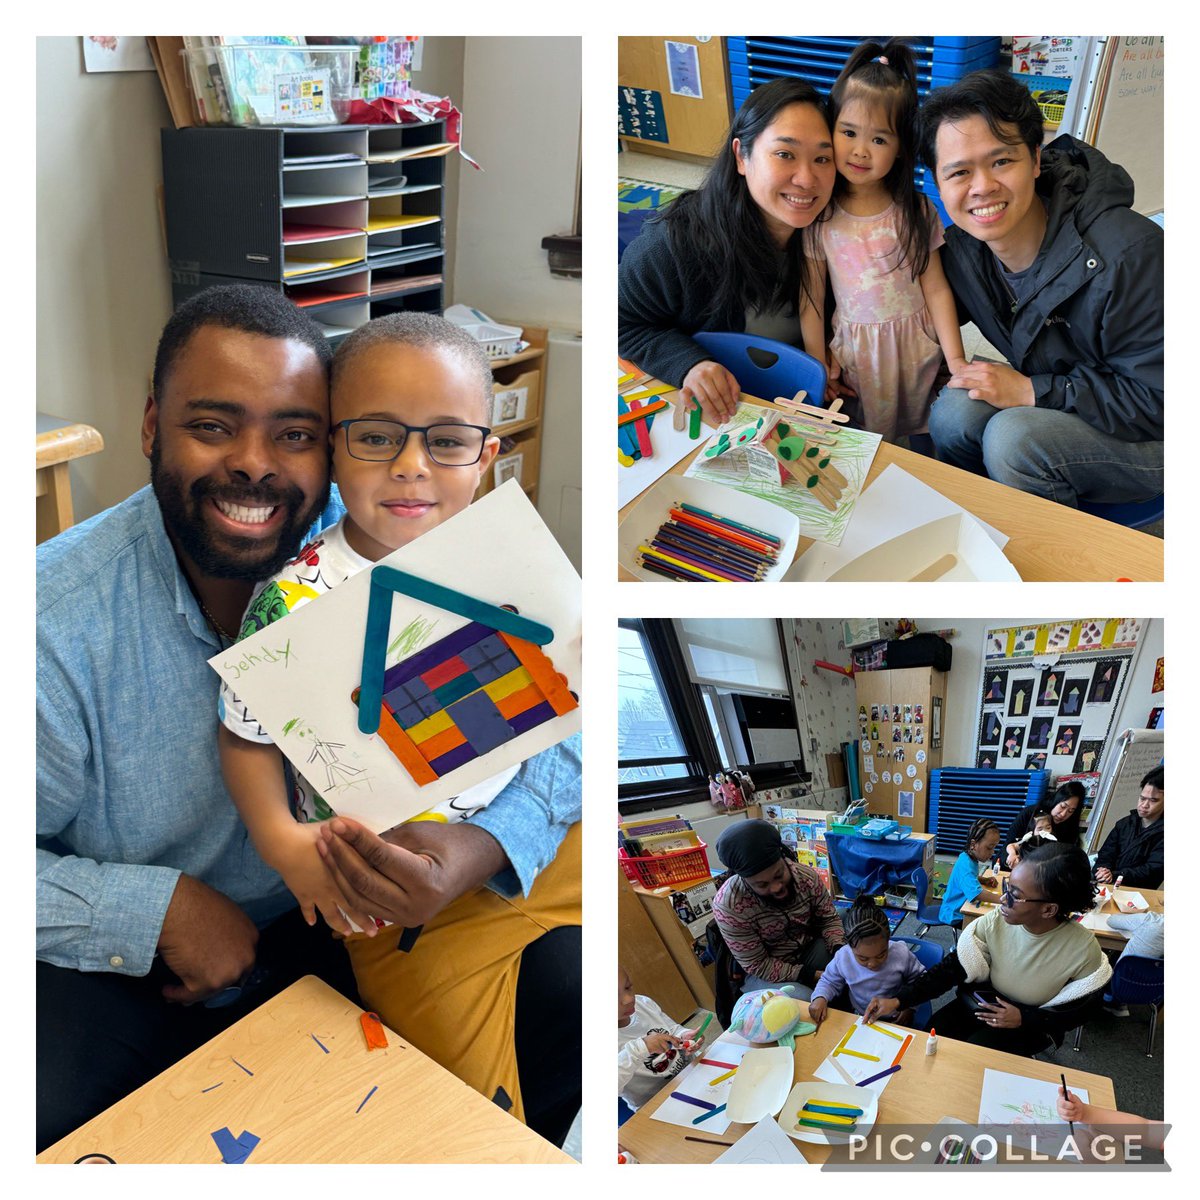 “Family Day” was a fun one for Joan Snow/ Glenwood 4K students and their families as they celebrated the day together! #Reimaginelearning @Rosaliefav @District22BKNY @DOEChancellor @NYCSchools @Stu_chasabenis @NYCCouncil